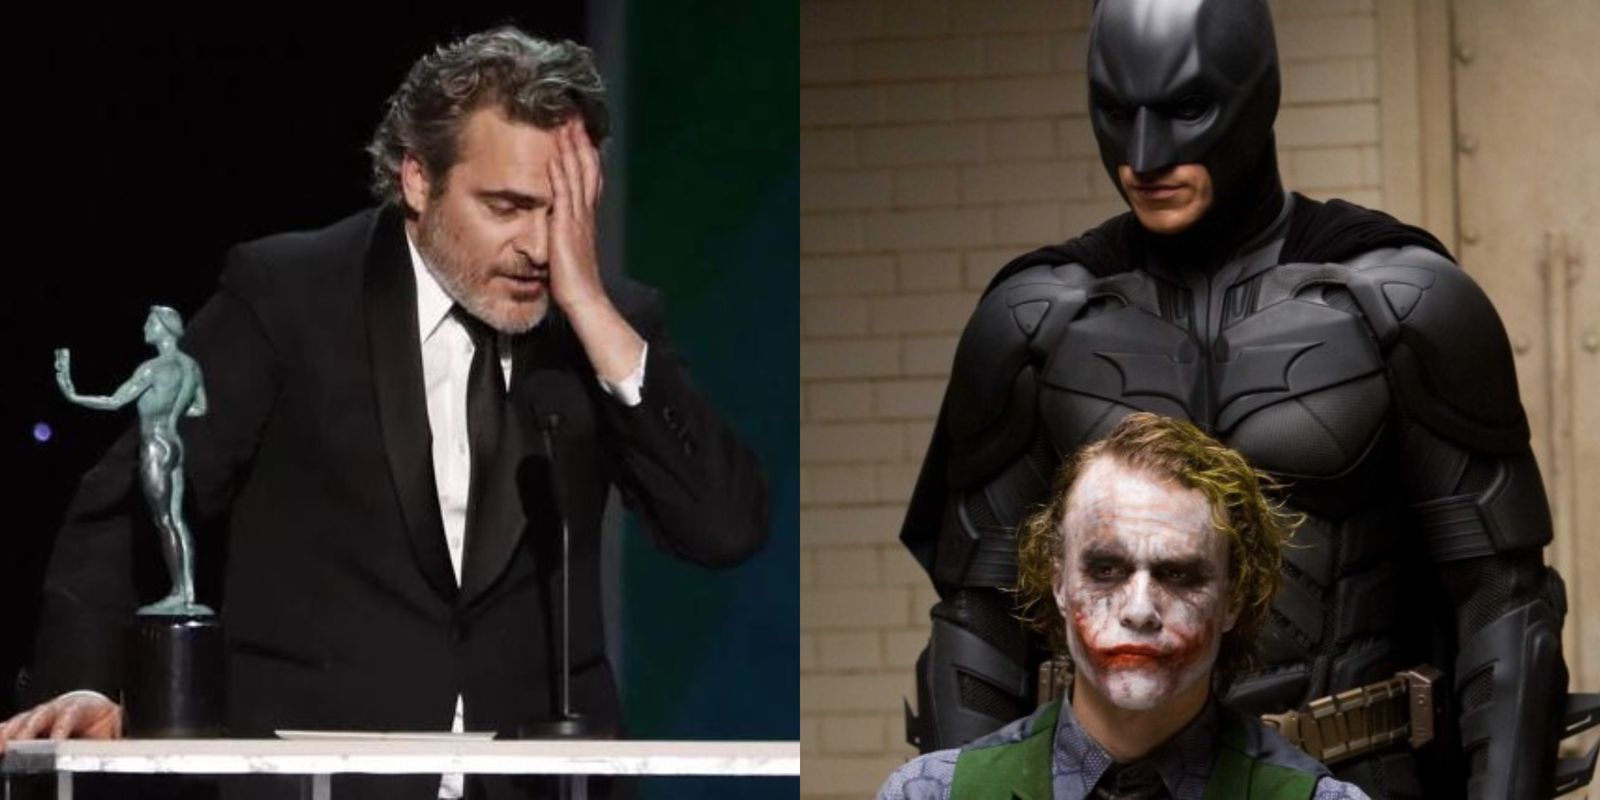 Joker Star Joaquin Phoenix Gives A Shout-Out To Heath Ledger At SAG Awards, Begs Christian Bale To Give One Bad Performance